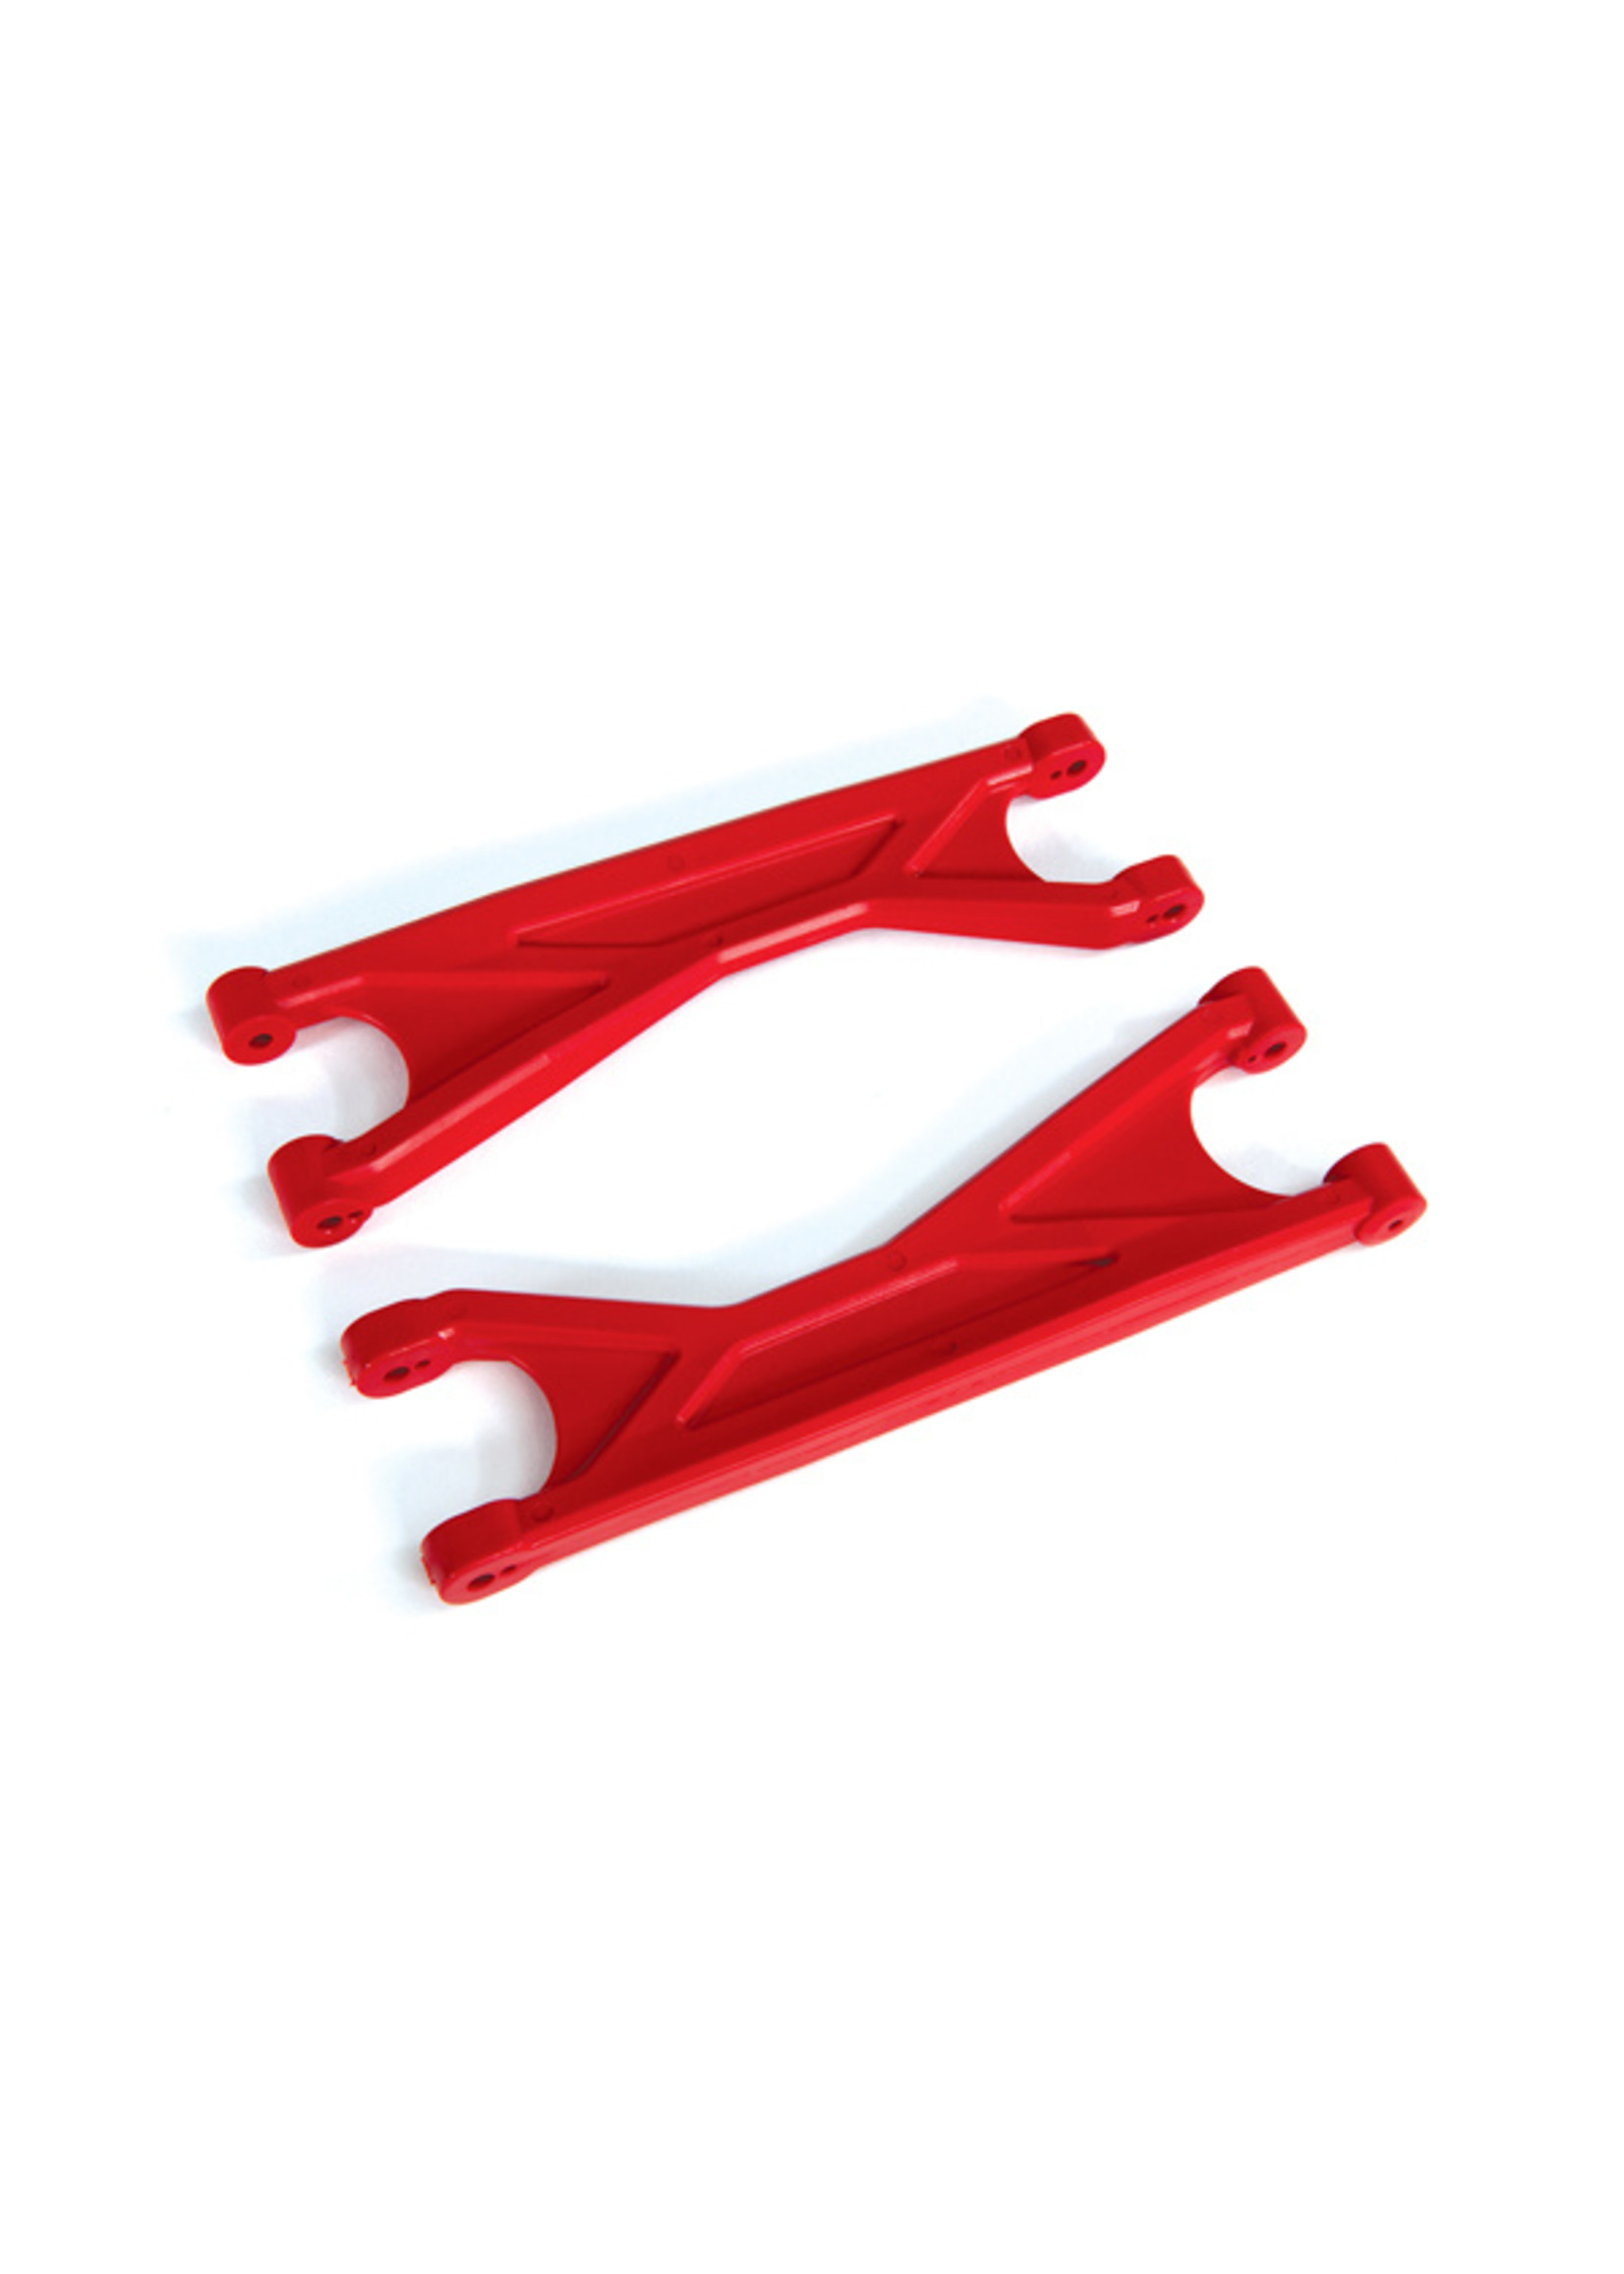 Traxxas 7829R - Heavy-Duty Upper Suspension Arms - Red